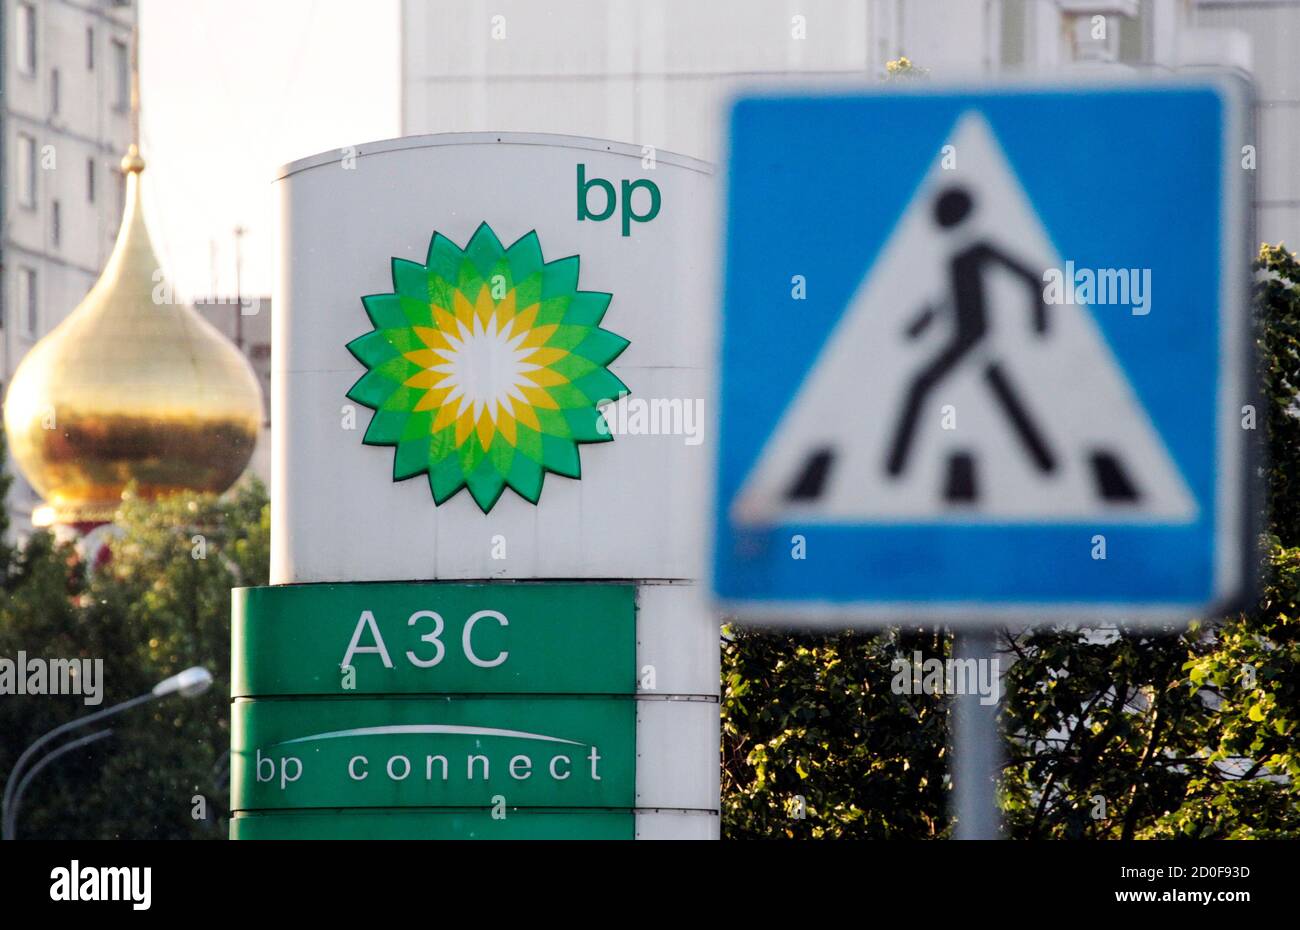 A sign board of a BP petrol station is seen in Moscow June 1, 2012. A Russian state firm has offered to buy BP Plc's half share in its Siberian joint venture, a source said on Friday, in what would amount to a stunning reversal for the British firm and a bold assertion of Kremlin control over the oil sector.  REUTERS/Sergei Karpukhin  (RUSSIA - Tags: BUSINESS ENERGY) Stock Photo